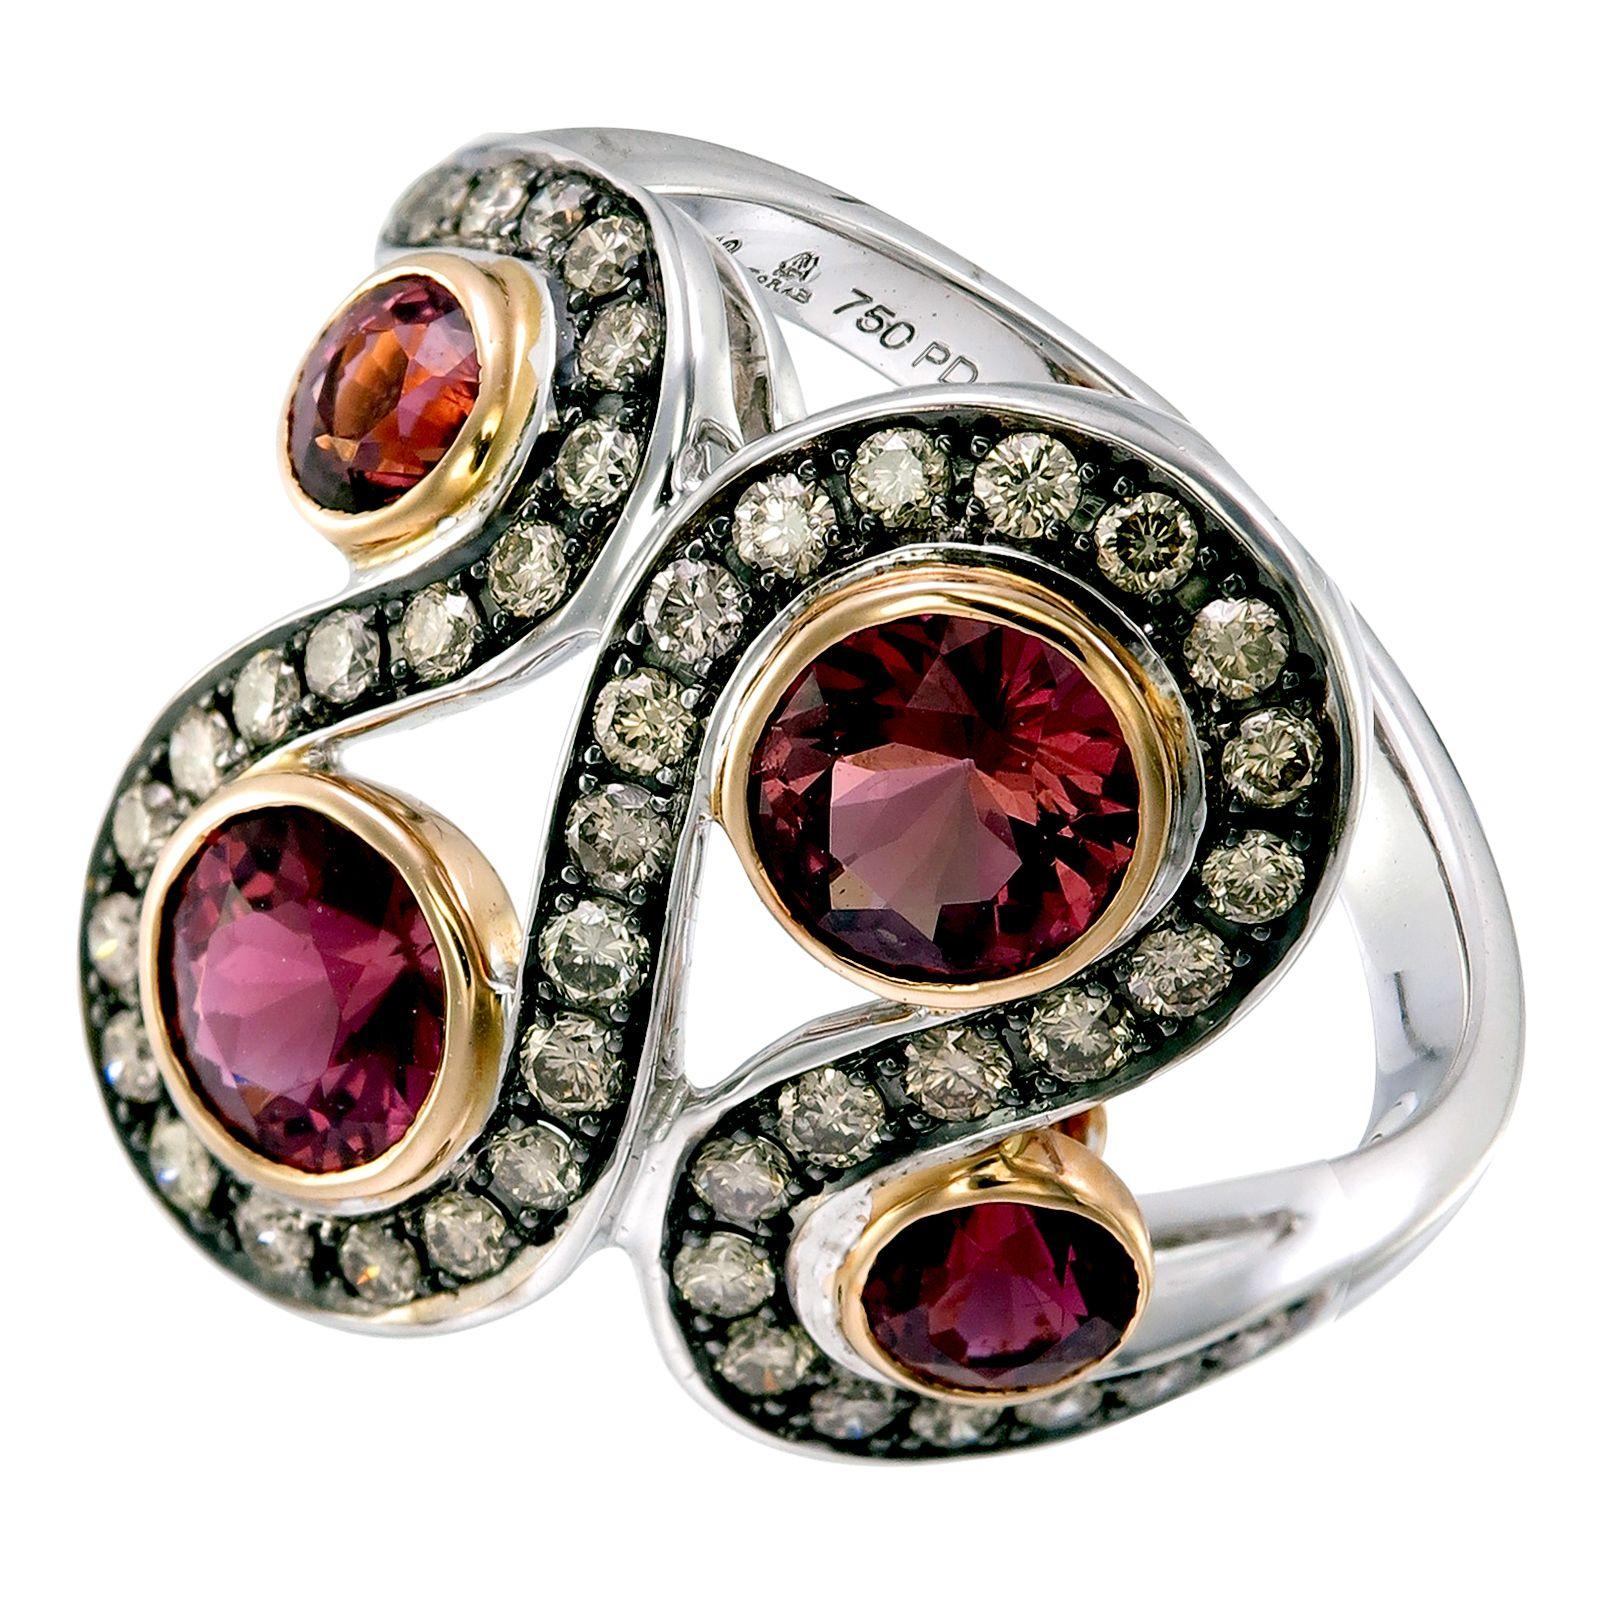 Curvy 18K Gold and Palladium topped with a row of 0.65-carat Diamonds slither within four round 2.07-carat Pink Tourmalines in an exceptional display of artistry and craftsmanship. 

This ring, as with all Zorab Creation pieces, are sent with a